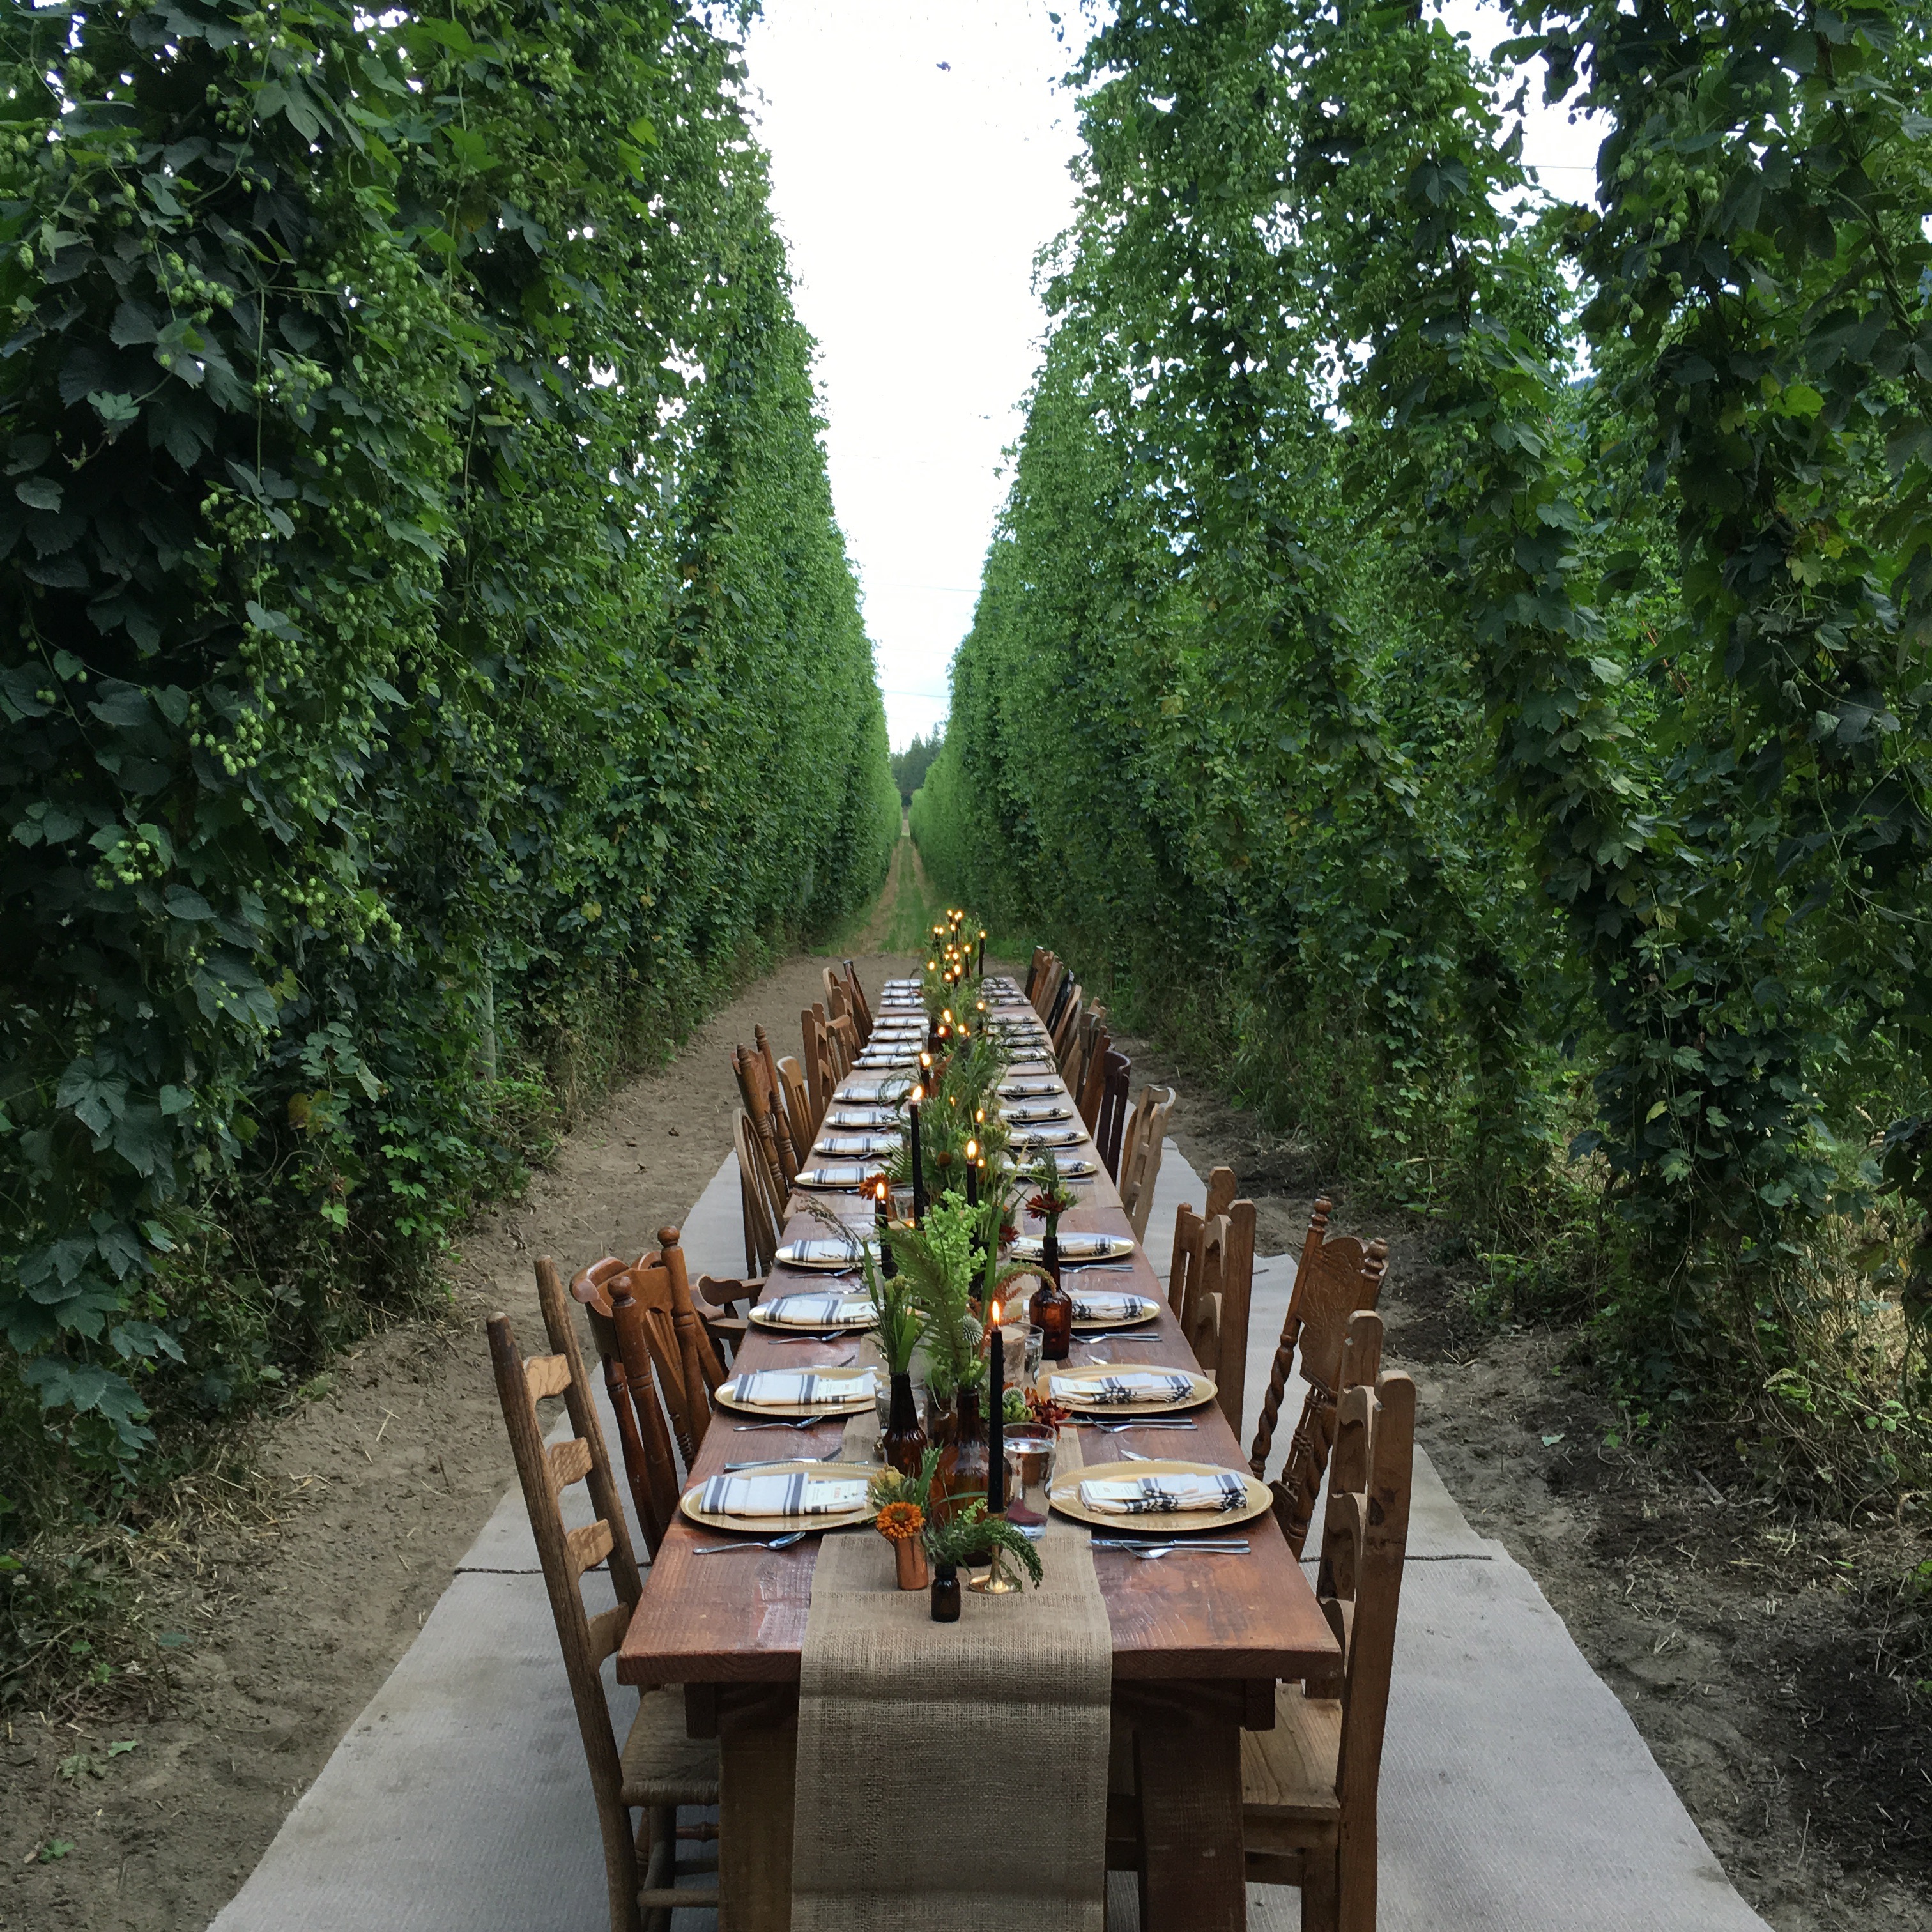 The table is set for the Farewell Beer Dinner at Elk Mountain Farms. 